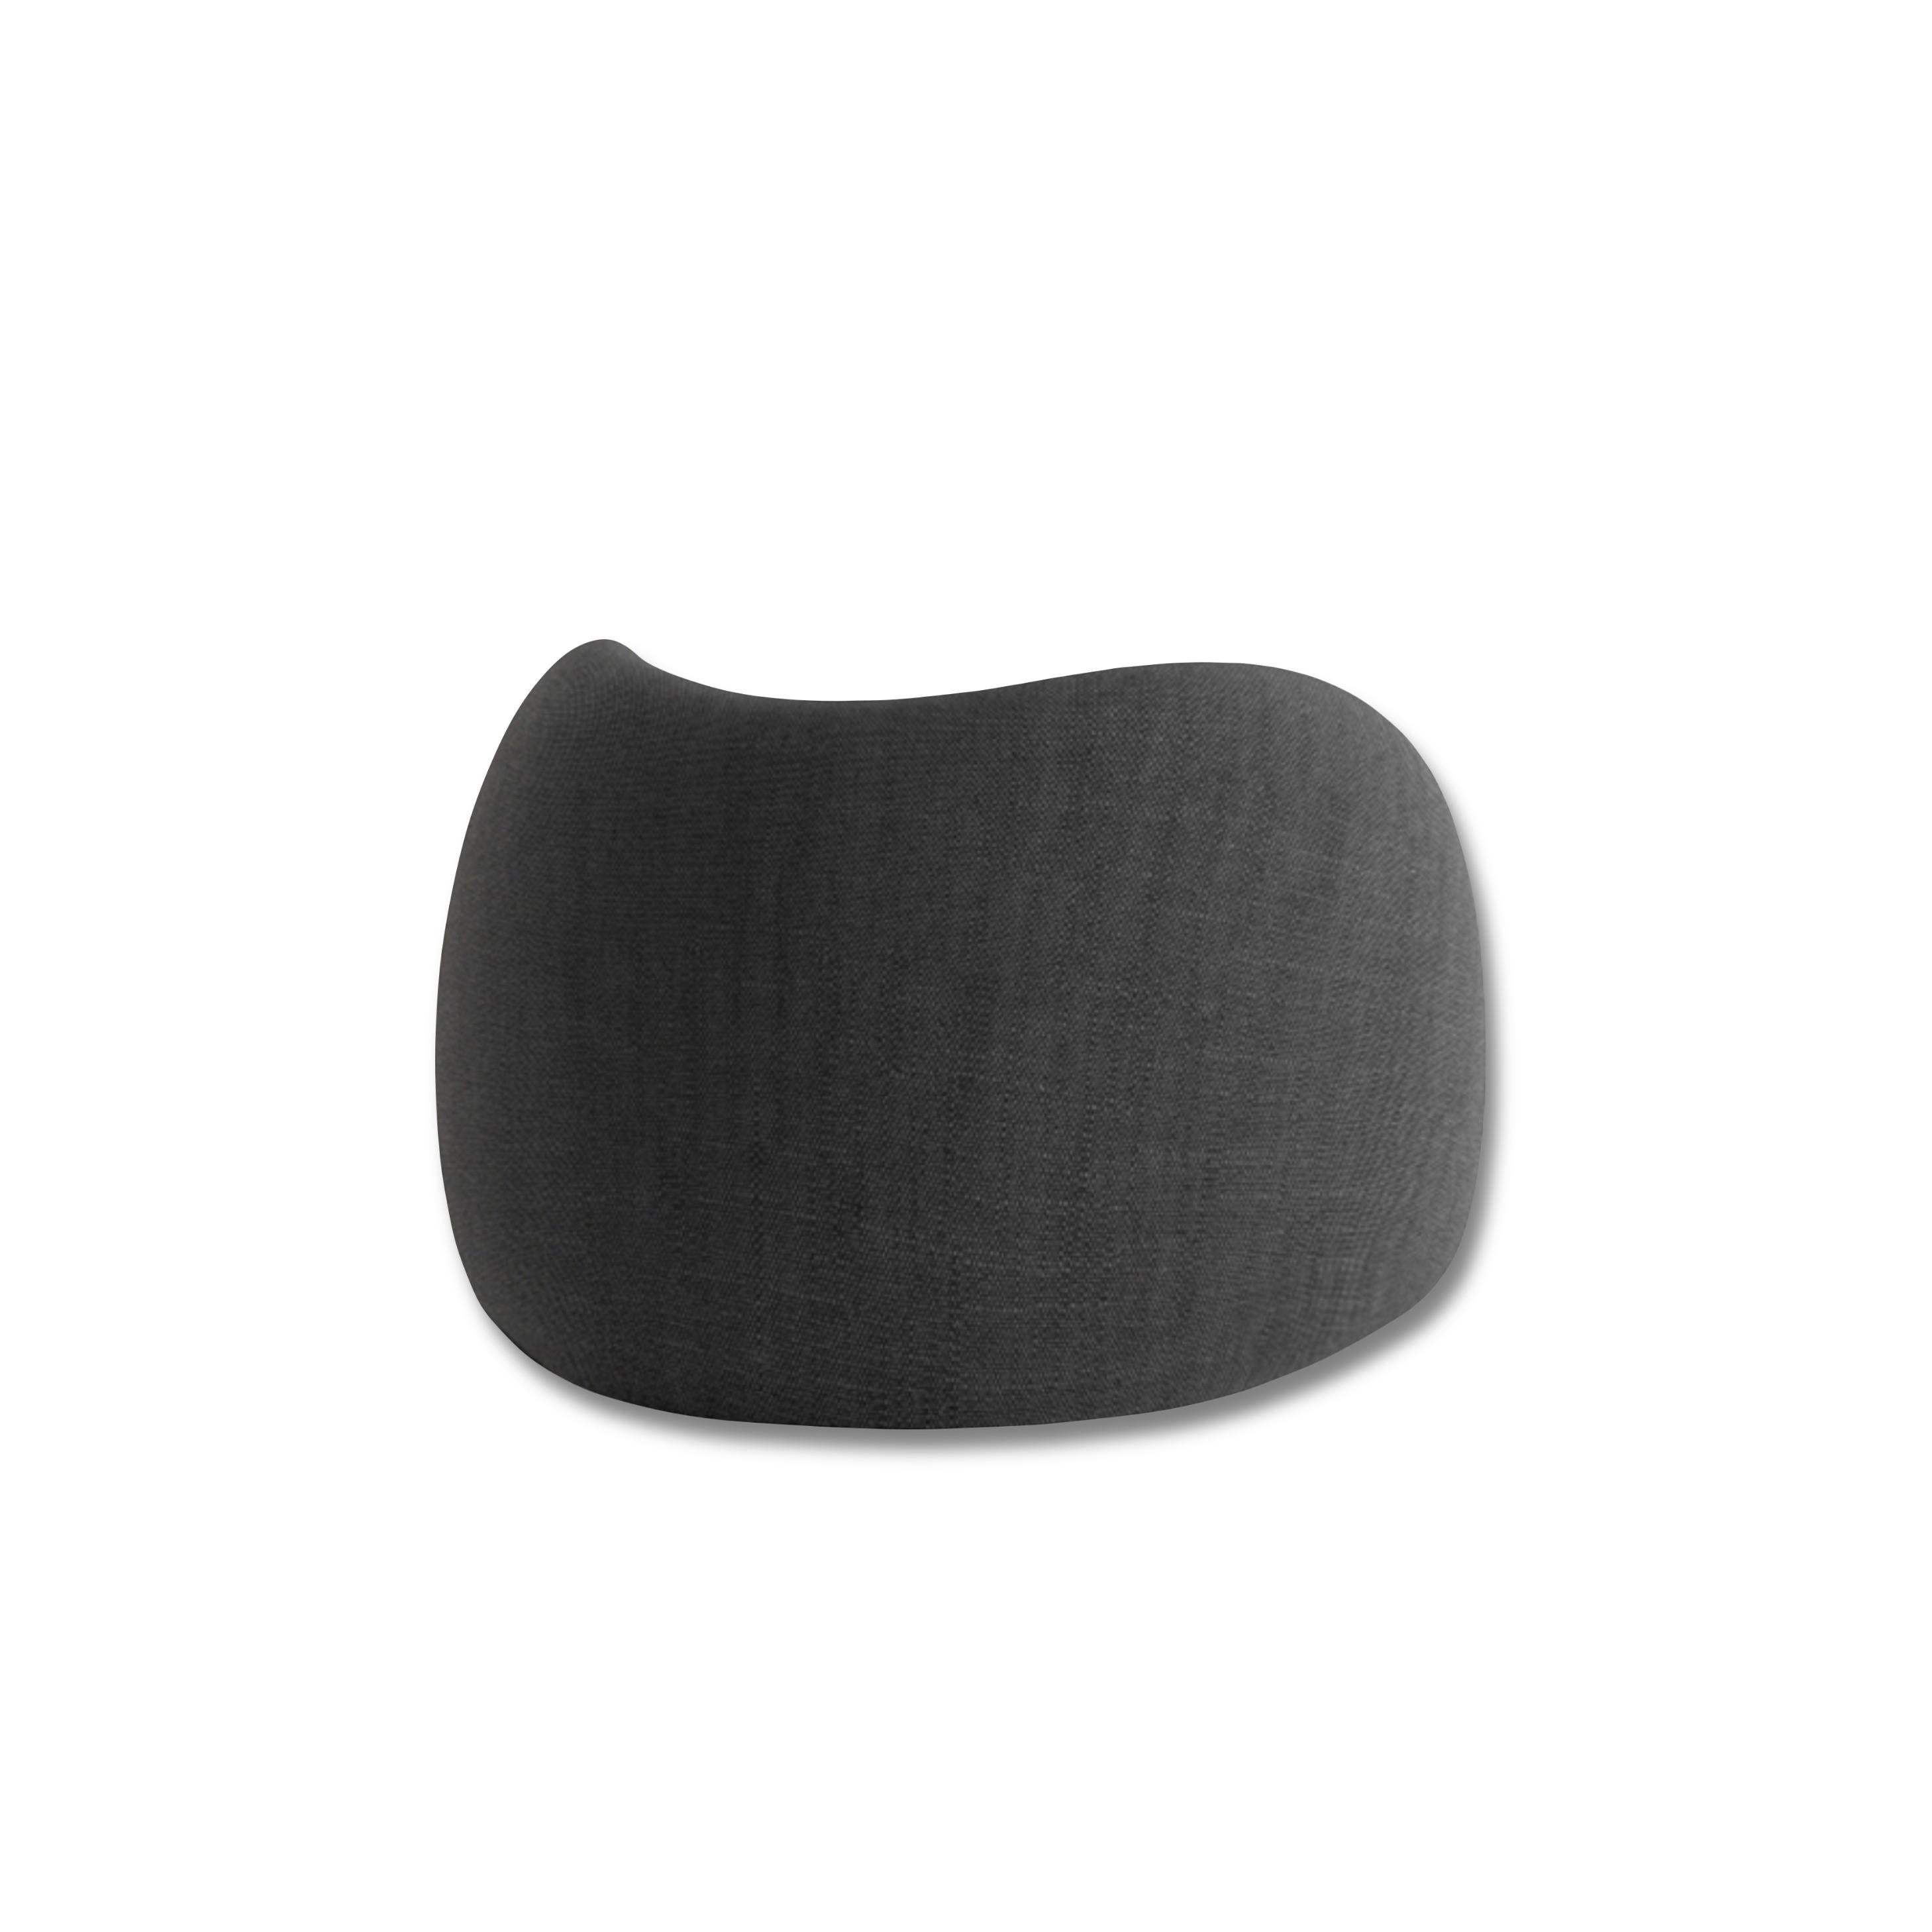 About
Modern Black Handmade Round Armchair Stone Obsidian by Alter Ego Studio

Armchair Stone Obsidian from Stone Collection
Design by Alter Ego Studio exclusively for October Gallery
Customizable Armchair
Materials: Obsidian Stone, Fabrics, Bouclé,